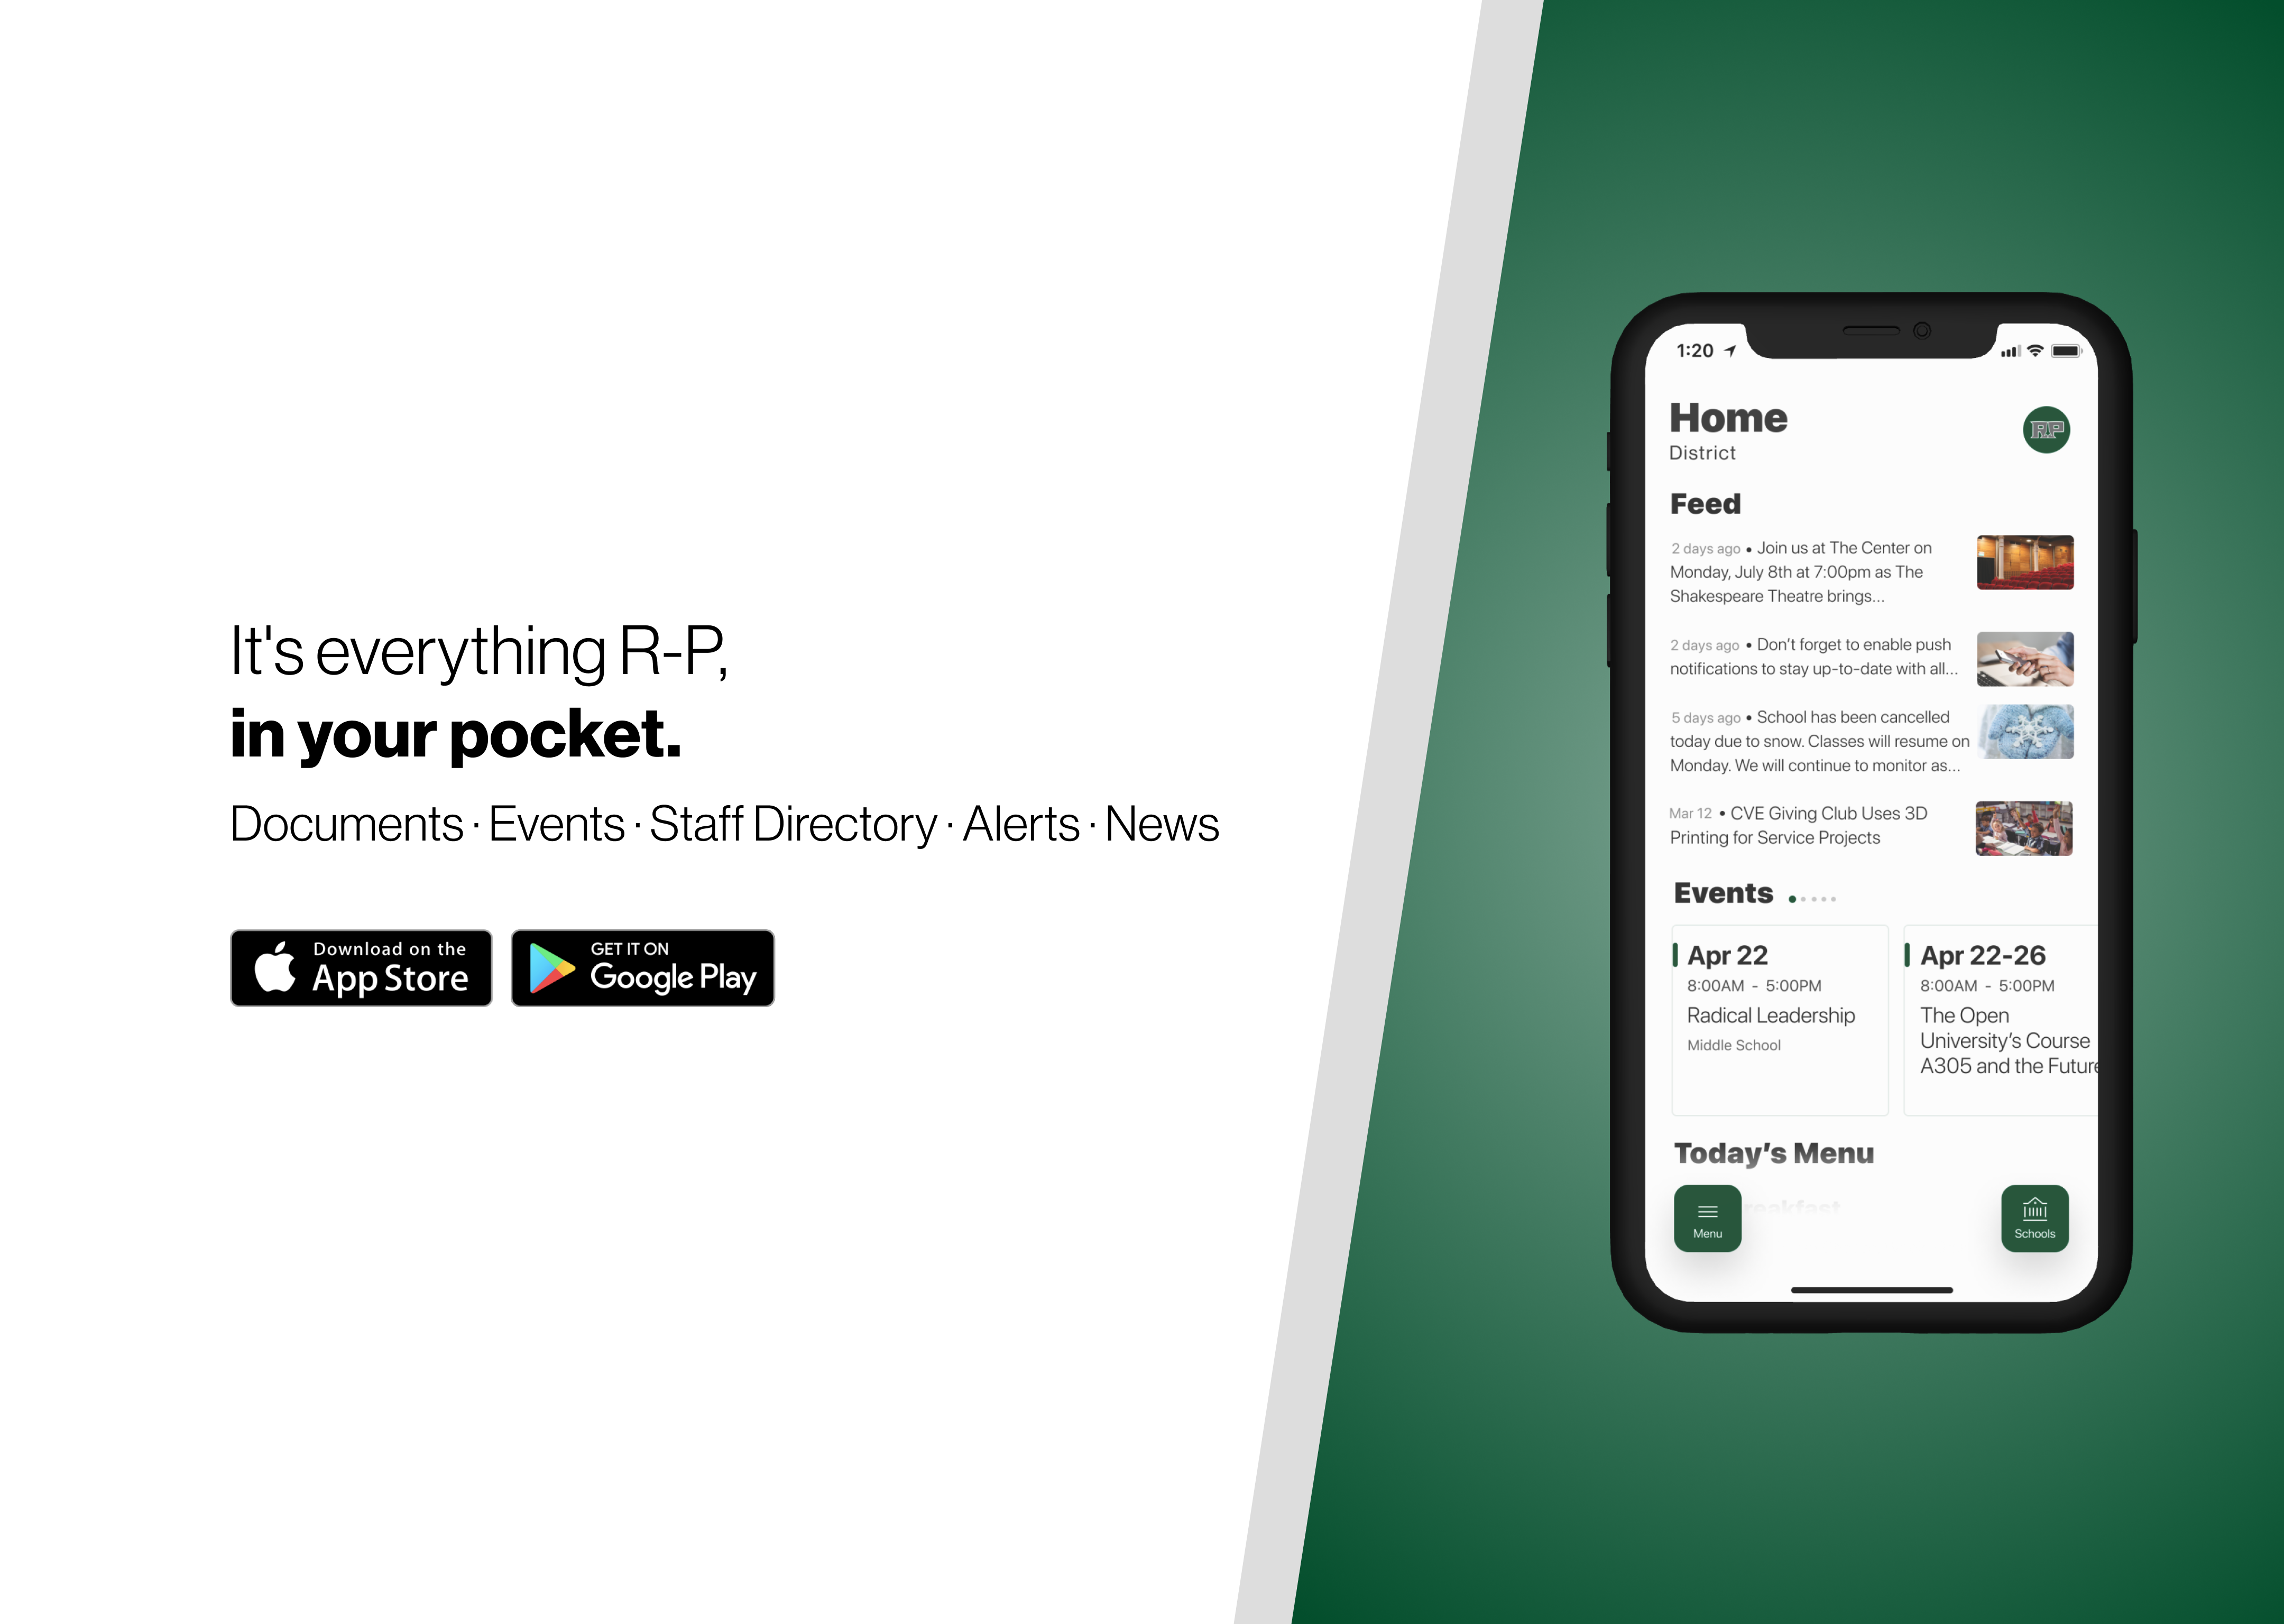 It's everything R-P, in your pocket.